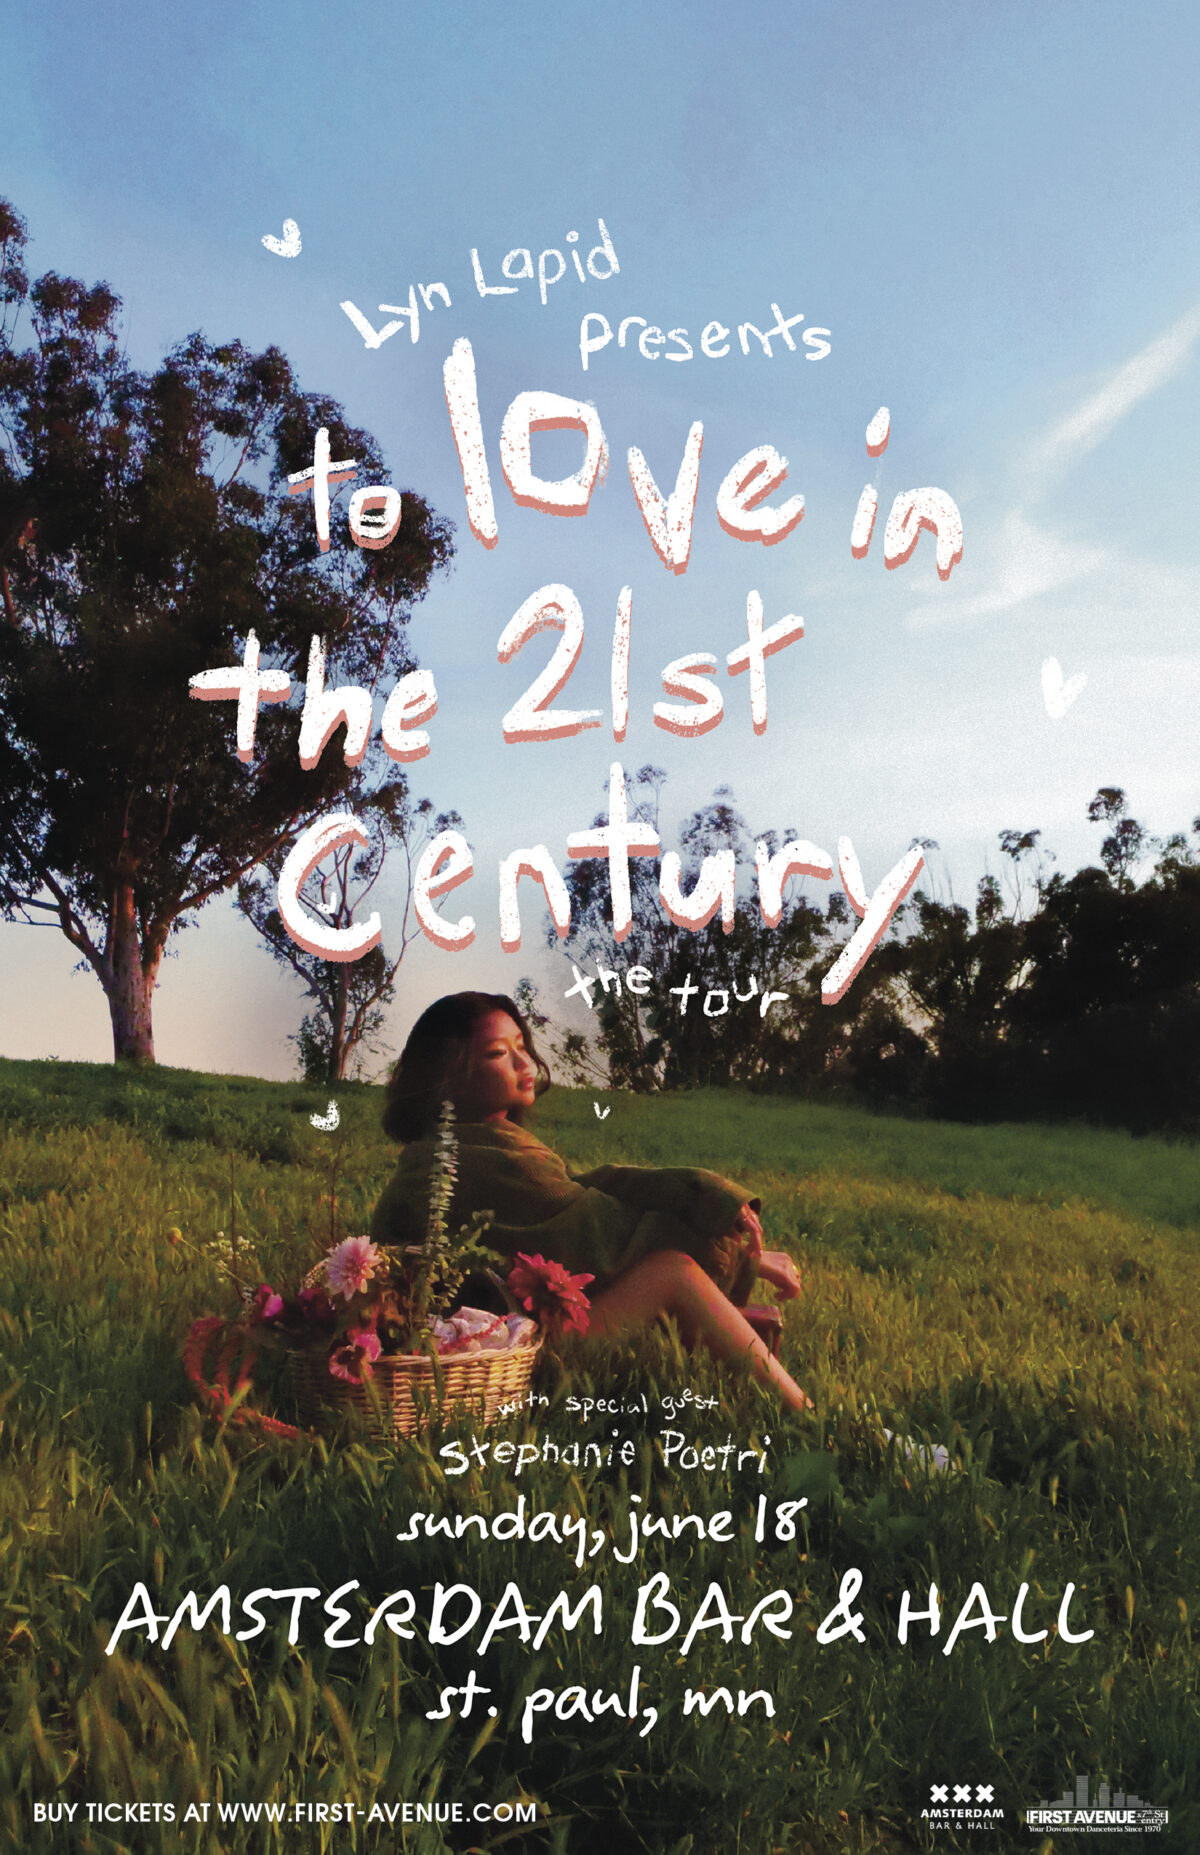 First Avenue presents…Lyn Lapid to love in the 21st century tour with